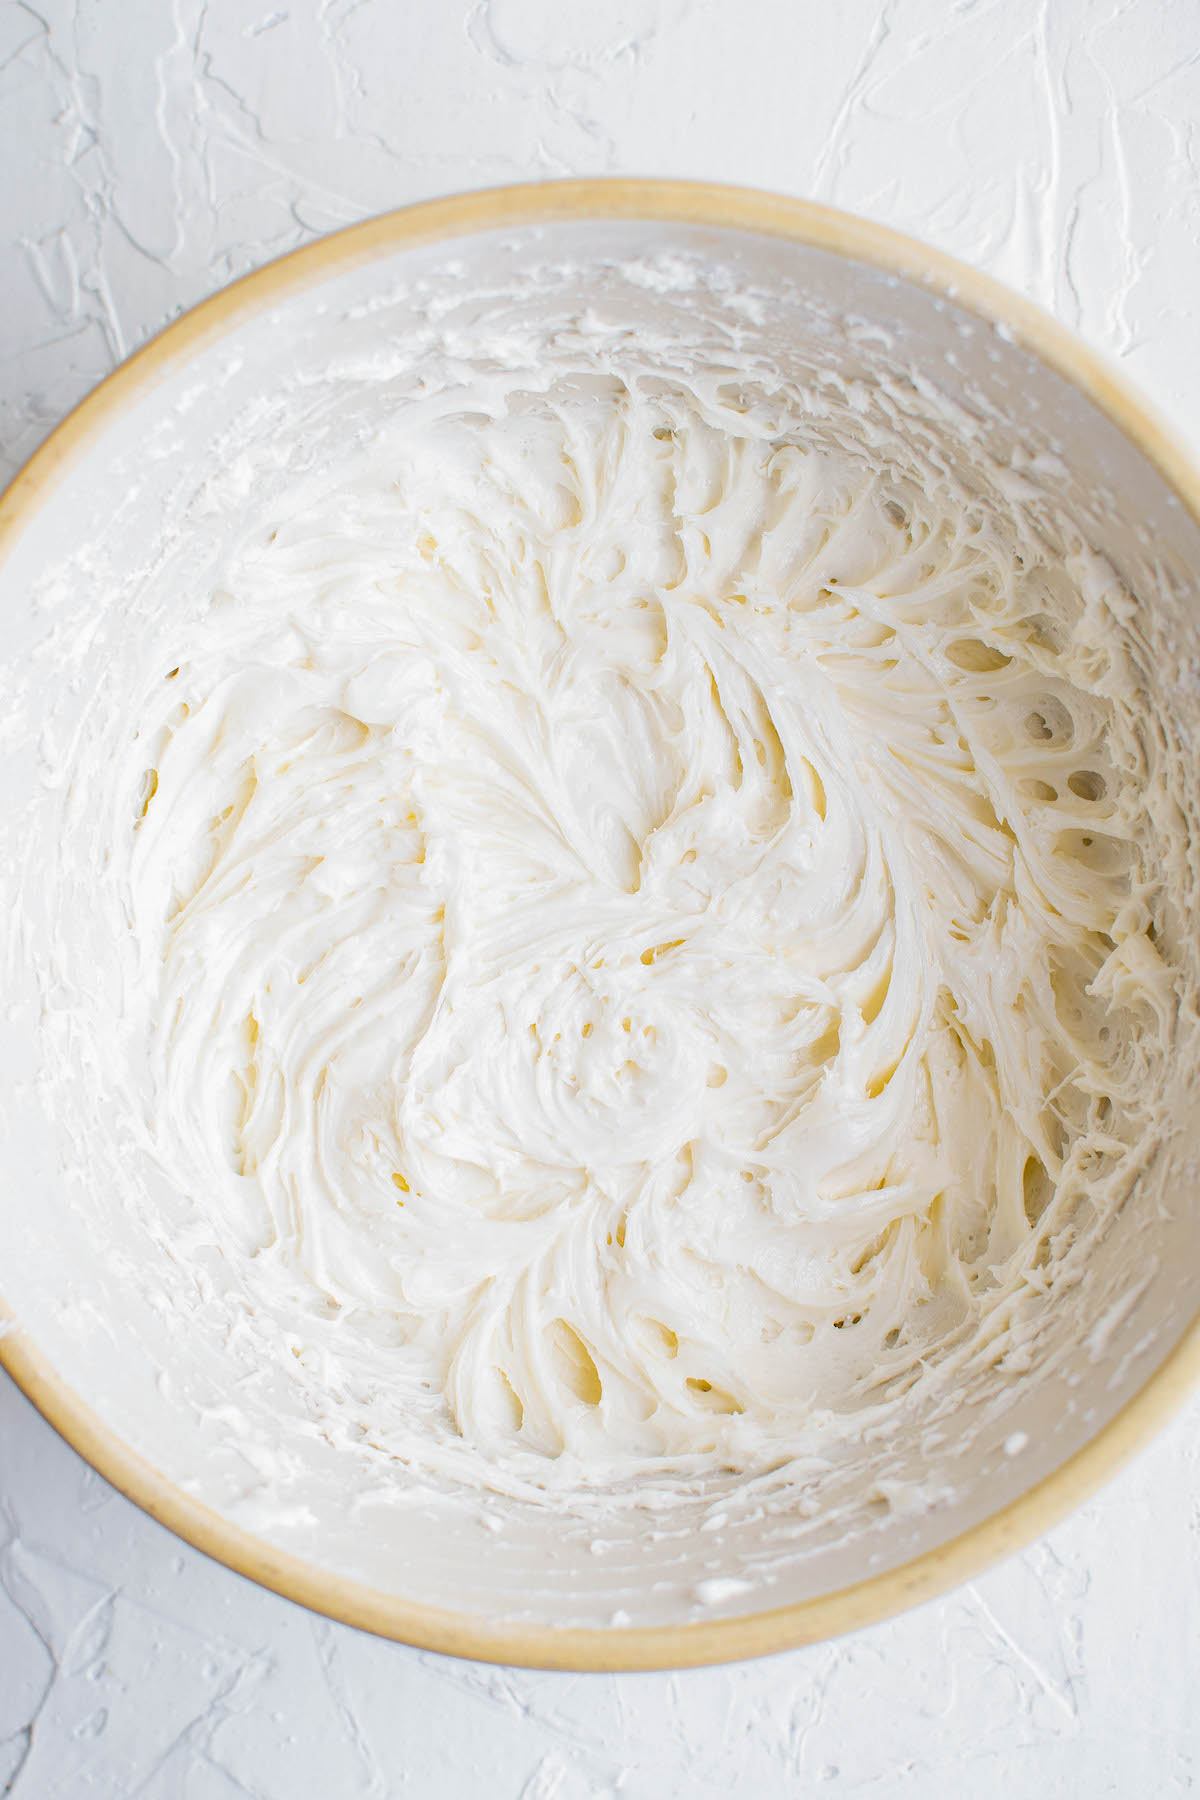 White frosting beat into a mixing bowl.